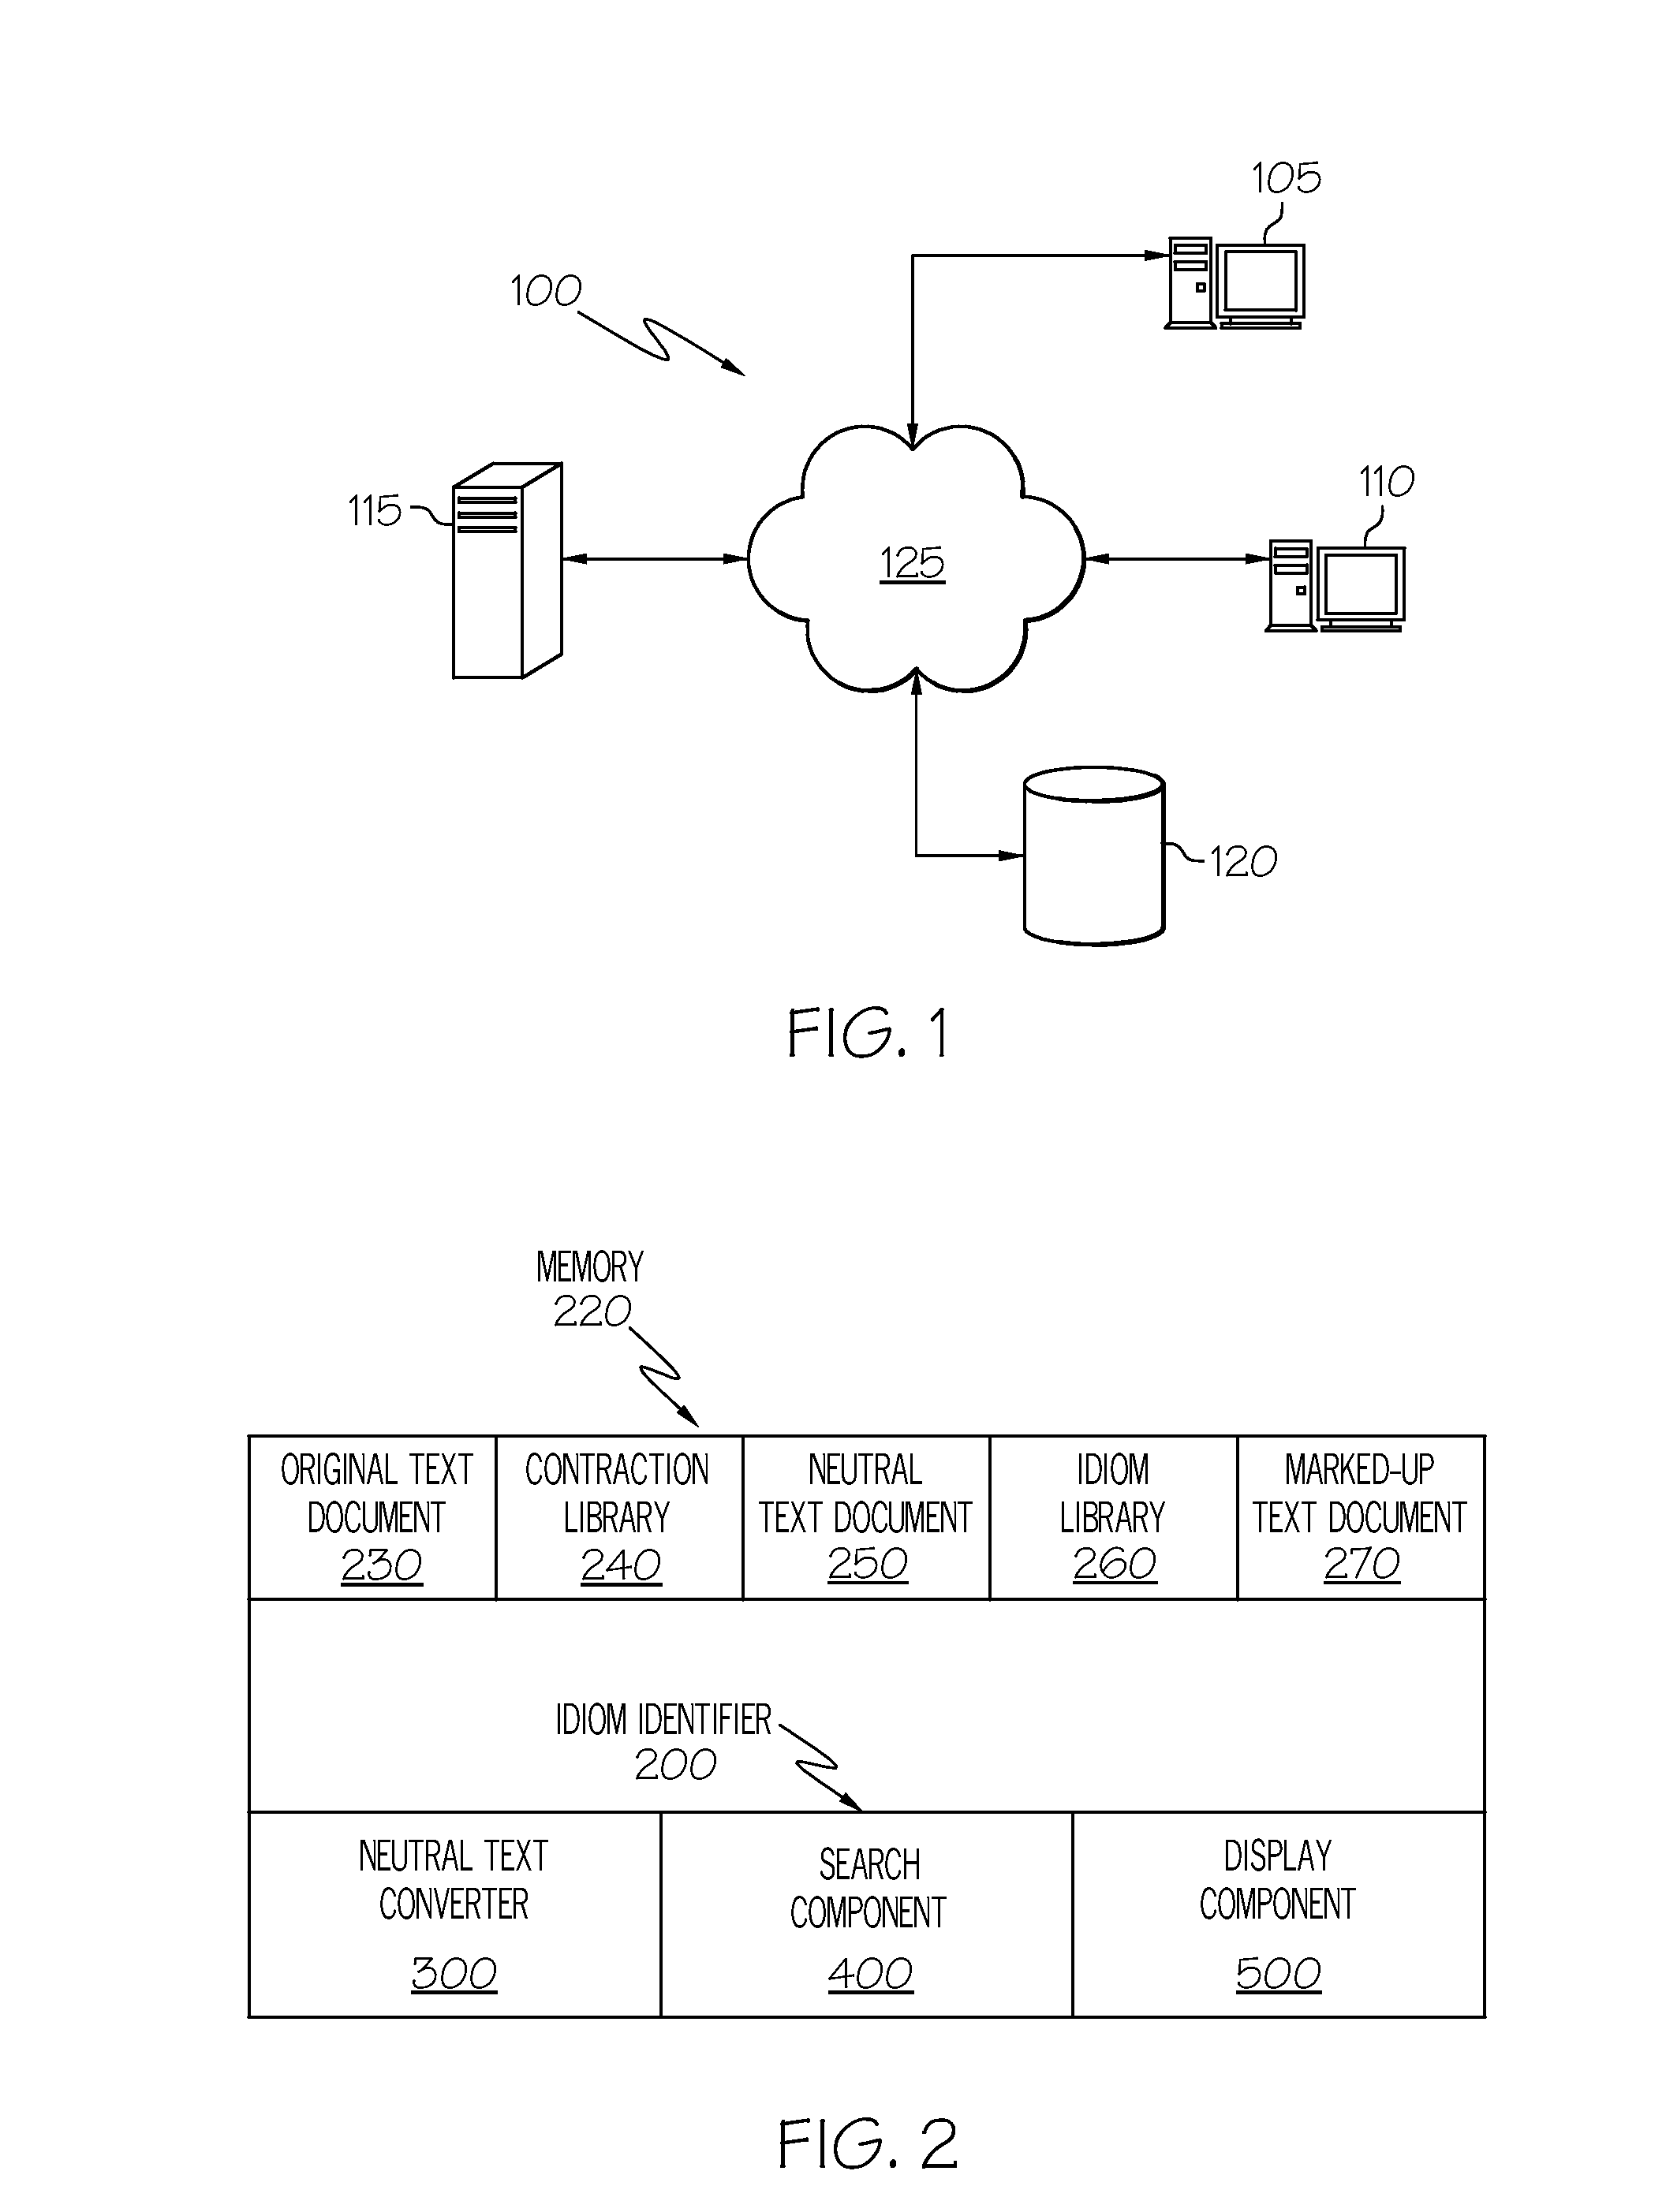 System and Method for Identifying And Defining Idioms